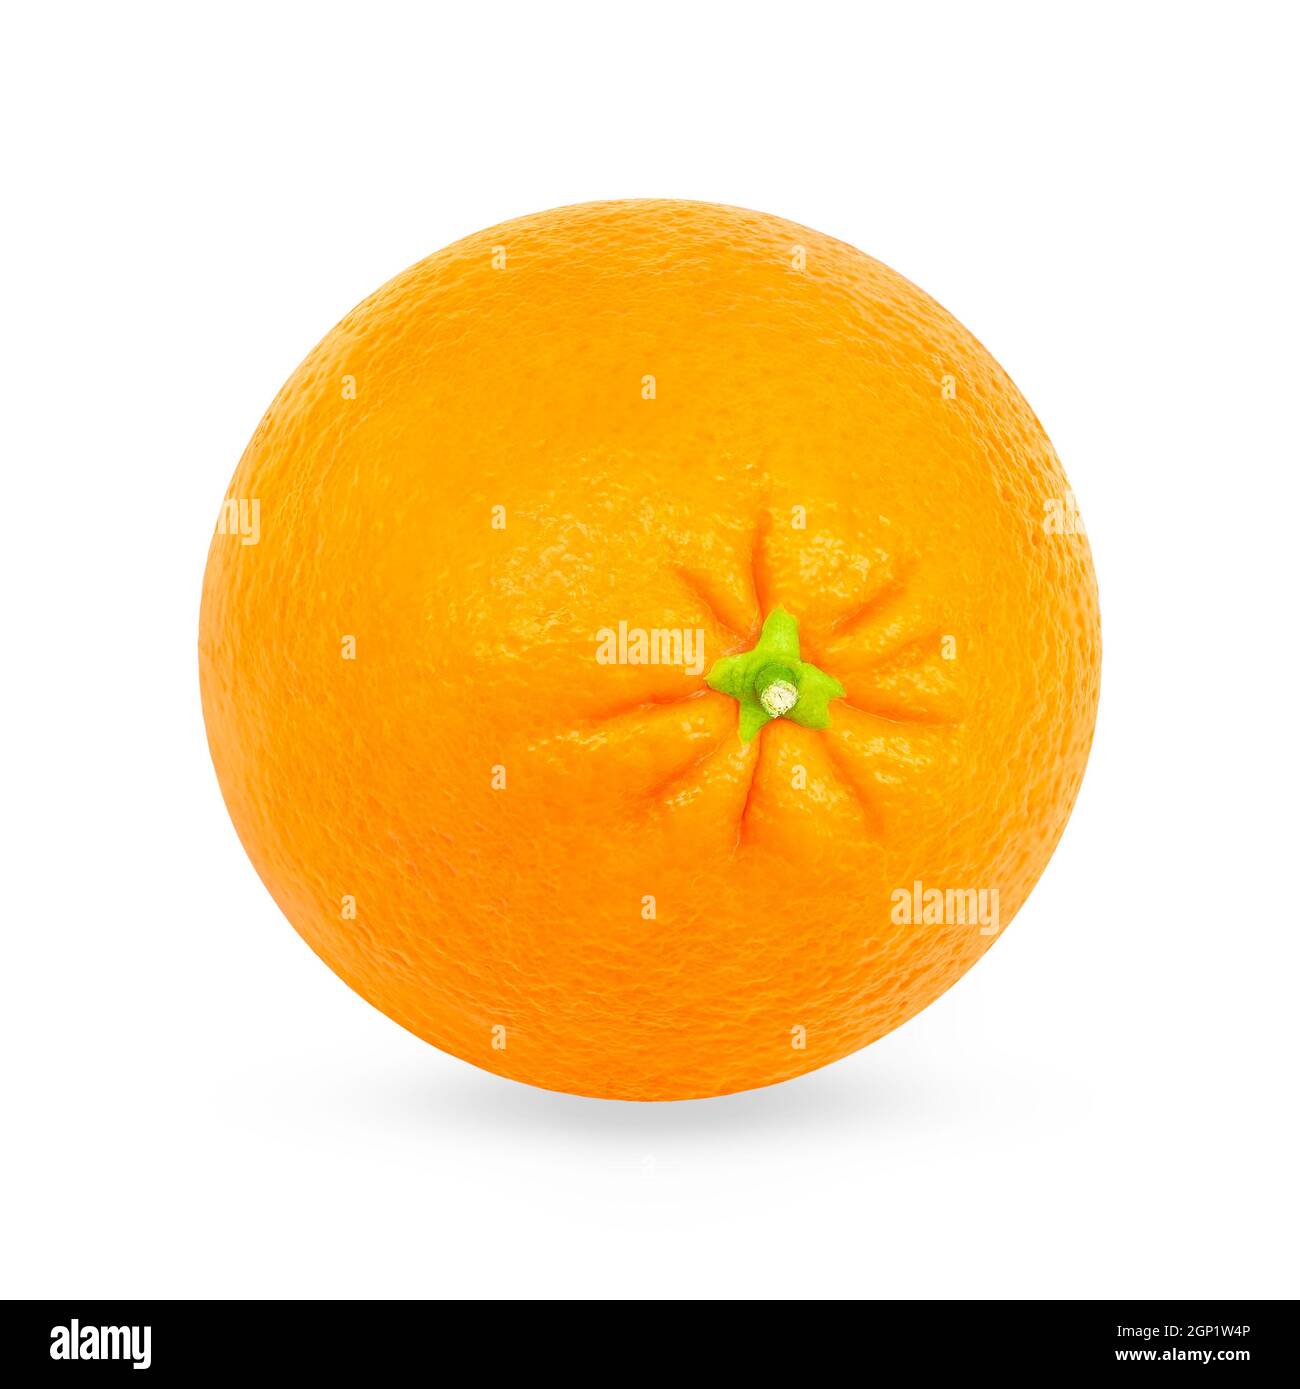 Isolated oranges. One whole ripe orange fruit on white background with clipping path for package design. Full depth of field. Stock Photo